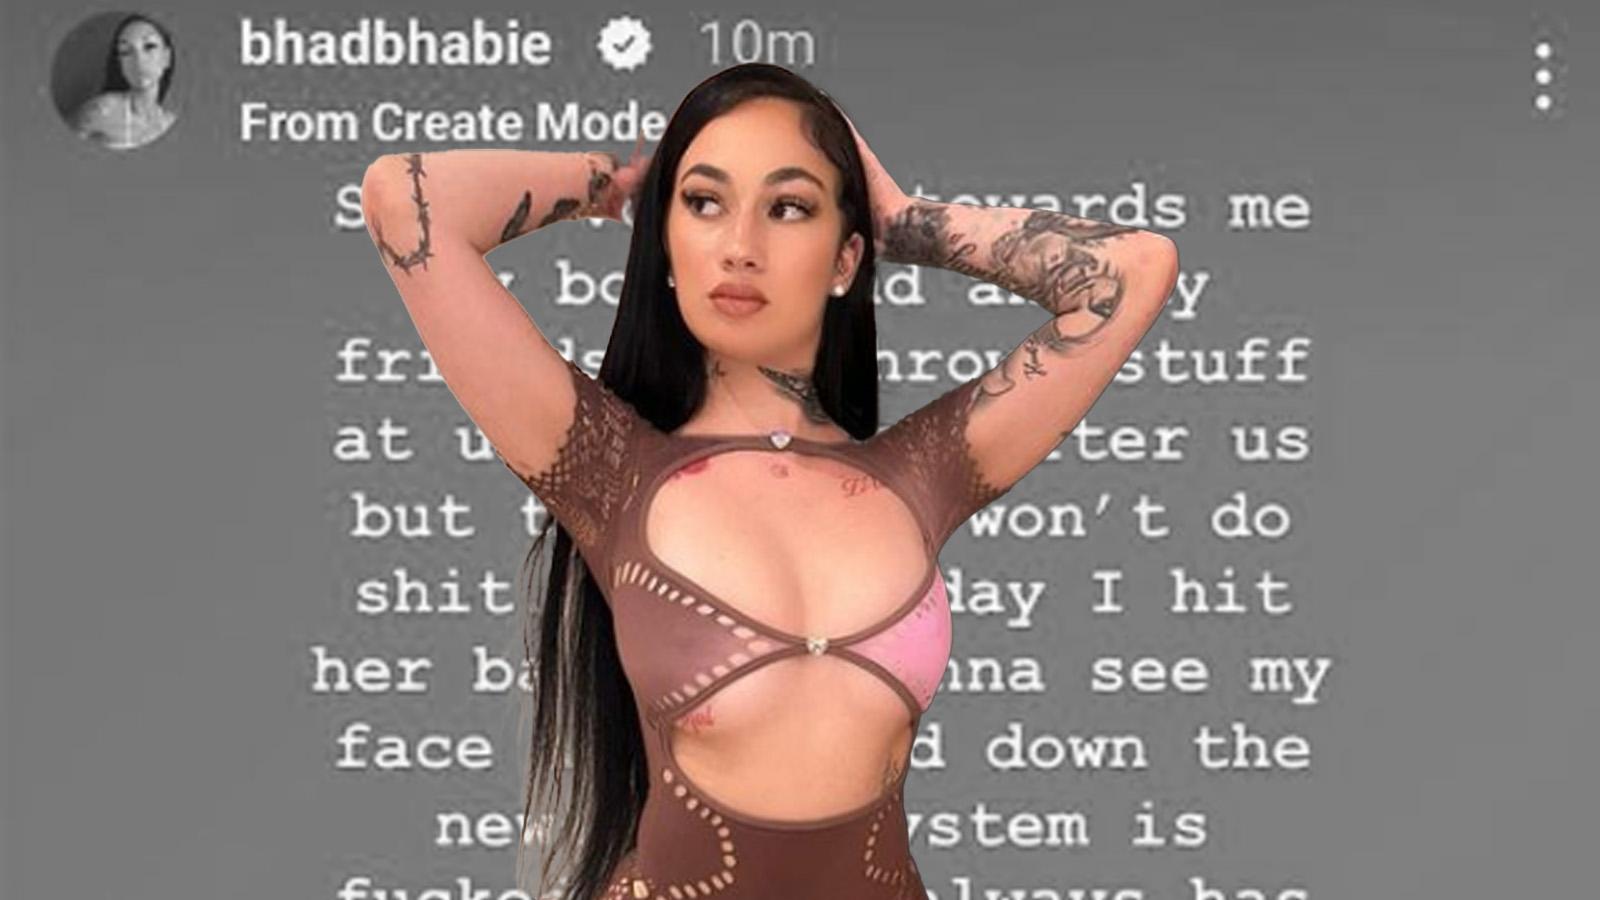 Bhad bhabie first day onlyfans